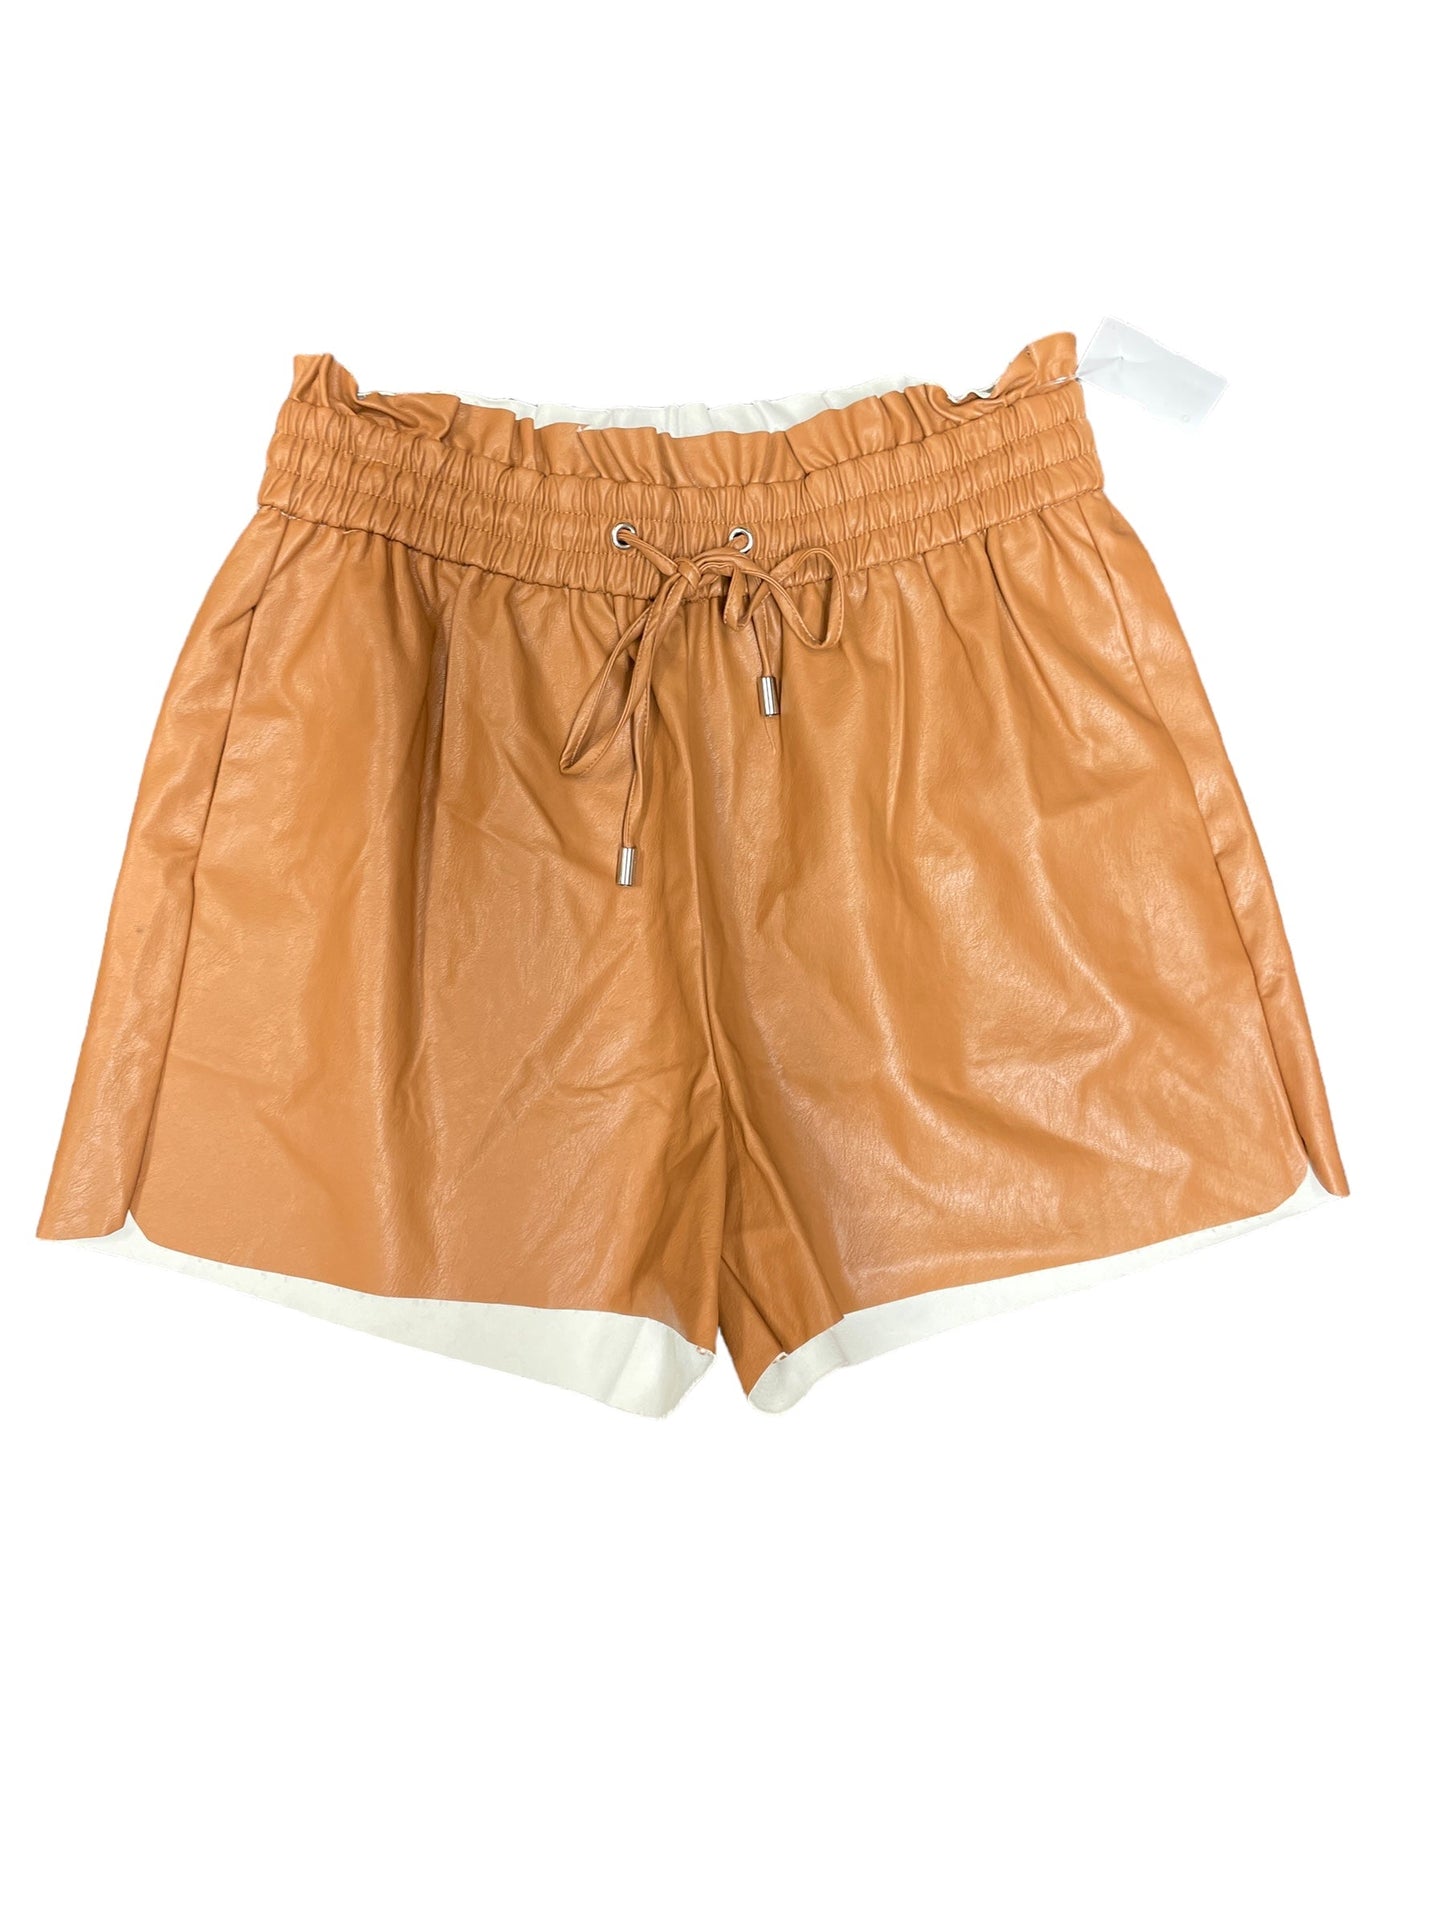 Brown Shorts Zenana Outfitters, Size L